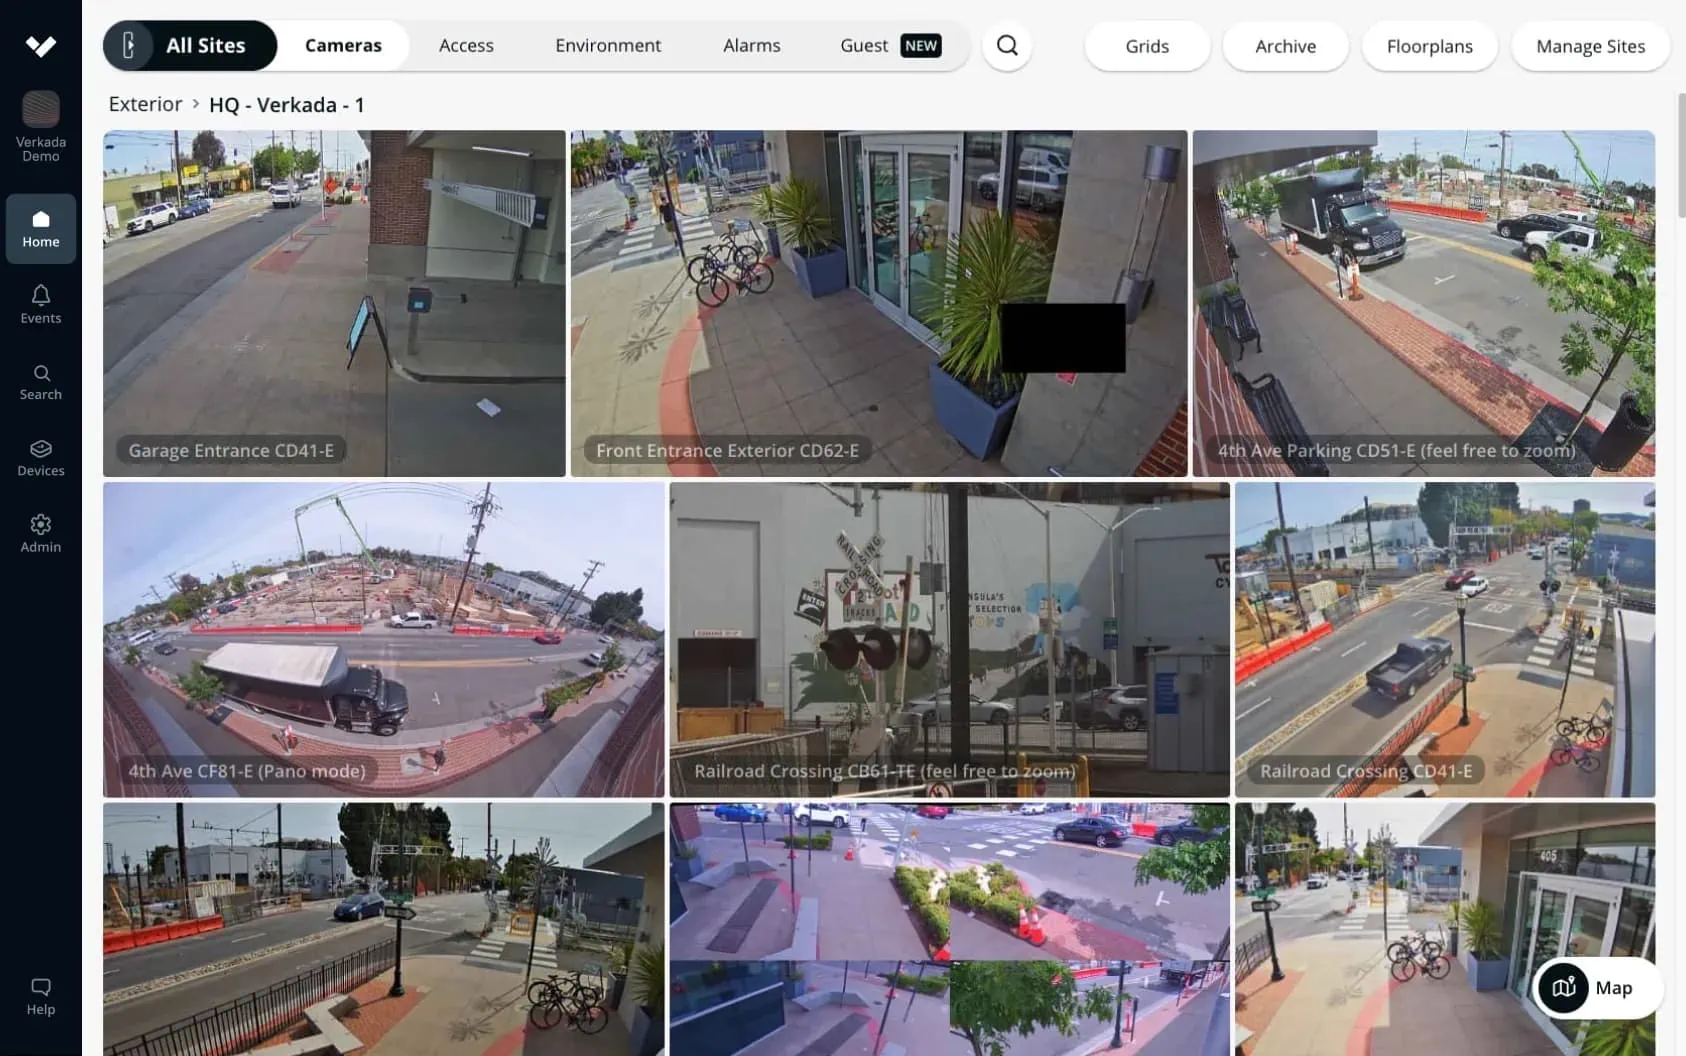 Command interface displaying footage captured by city surveillance cameras